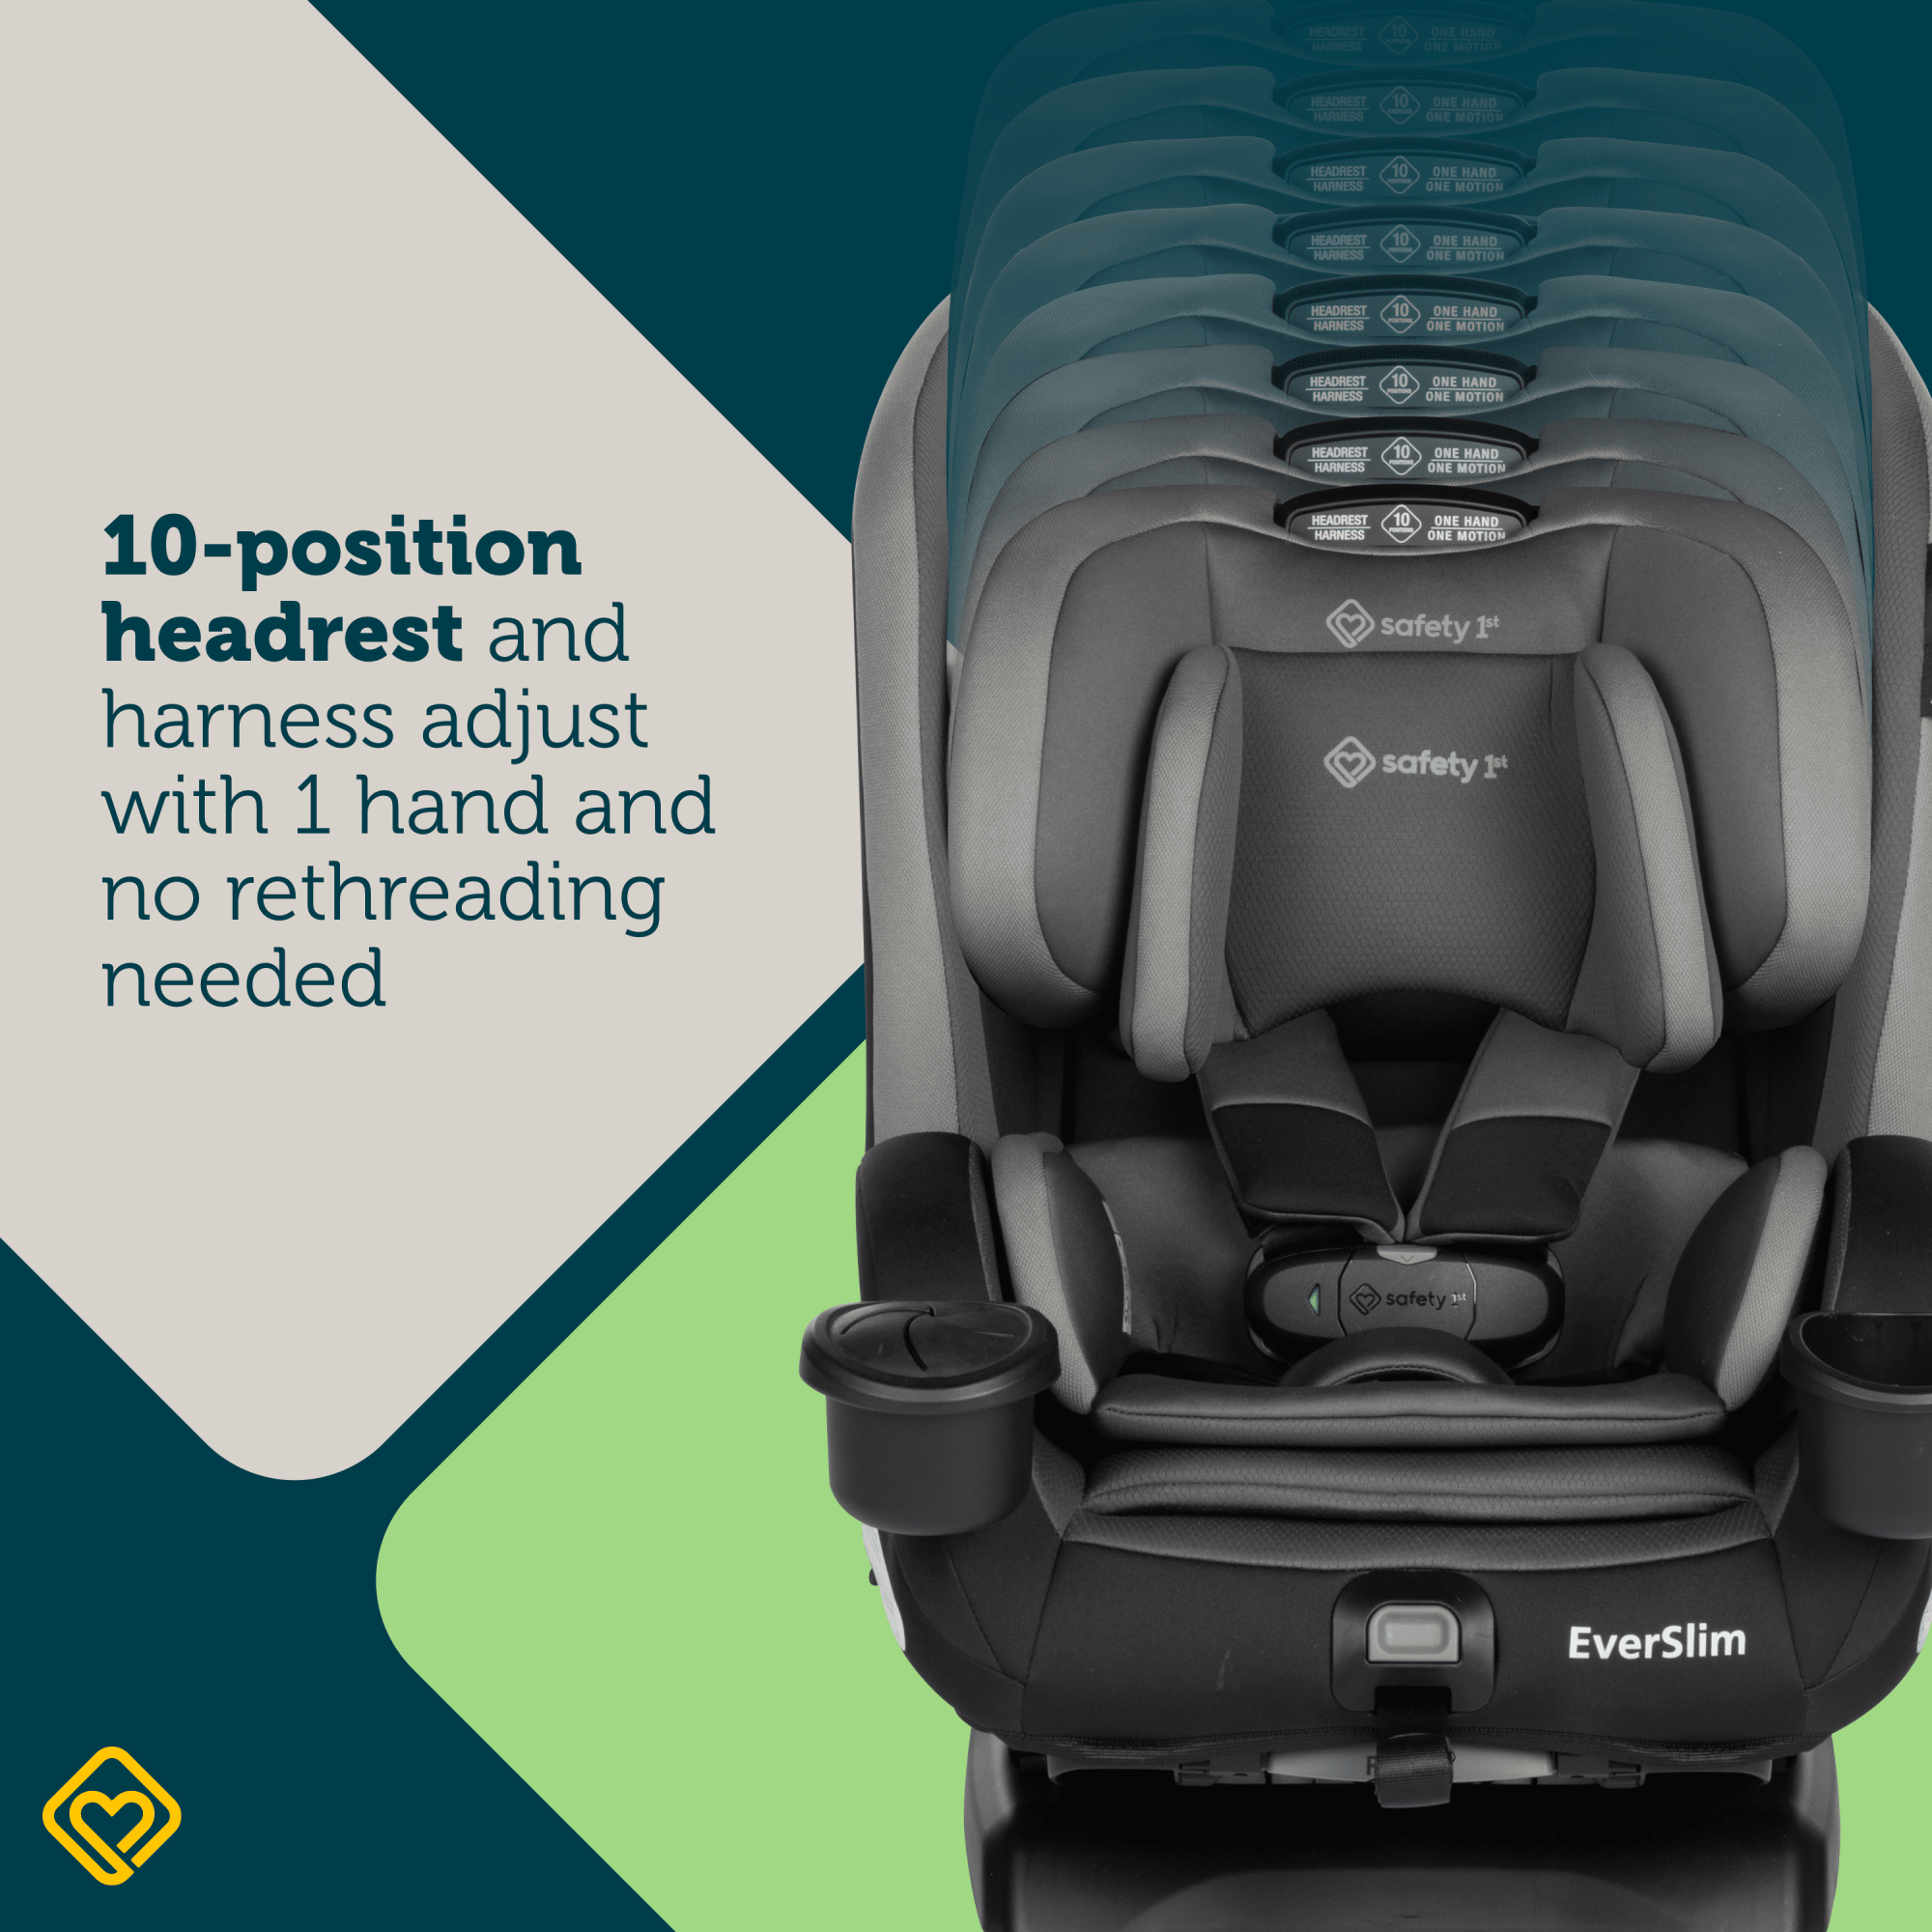 EverSlim 4-Mode All-in-One Convertible Car Seat - 10-position headrest and harness adjust with 1 hand and no rethreading needed